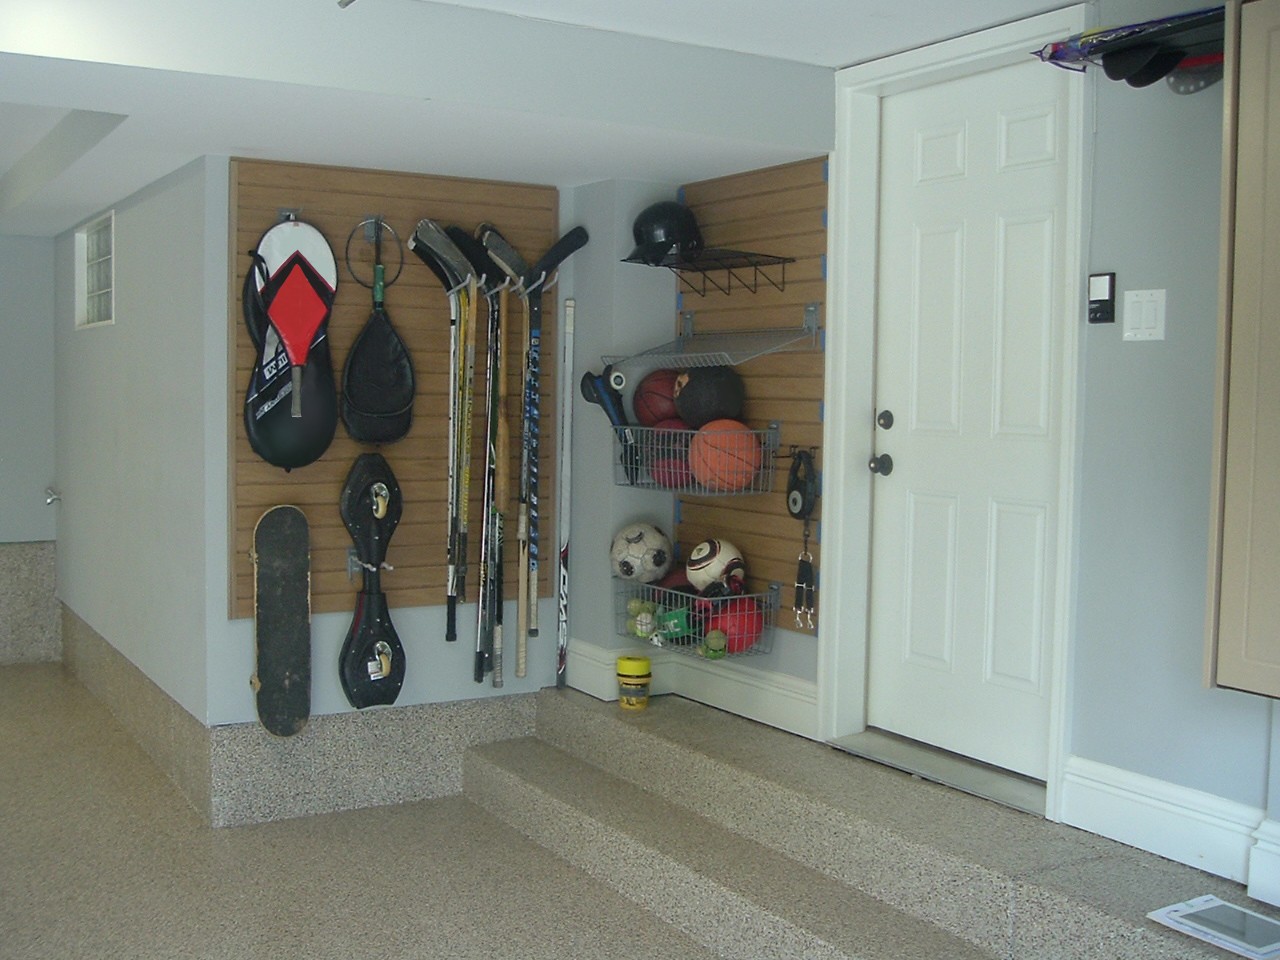 Use SlatWall Panels & SlatWall Accessories to Organize kids' toys and sports equipment